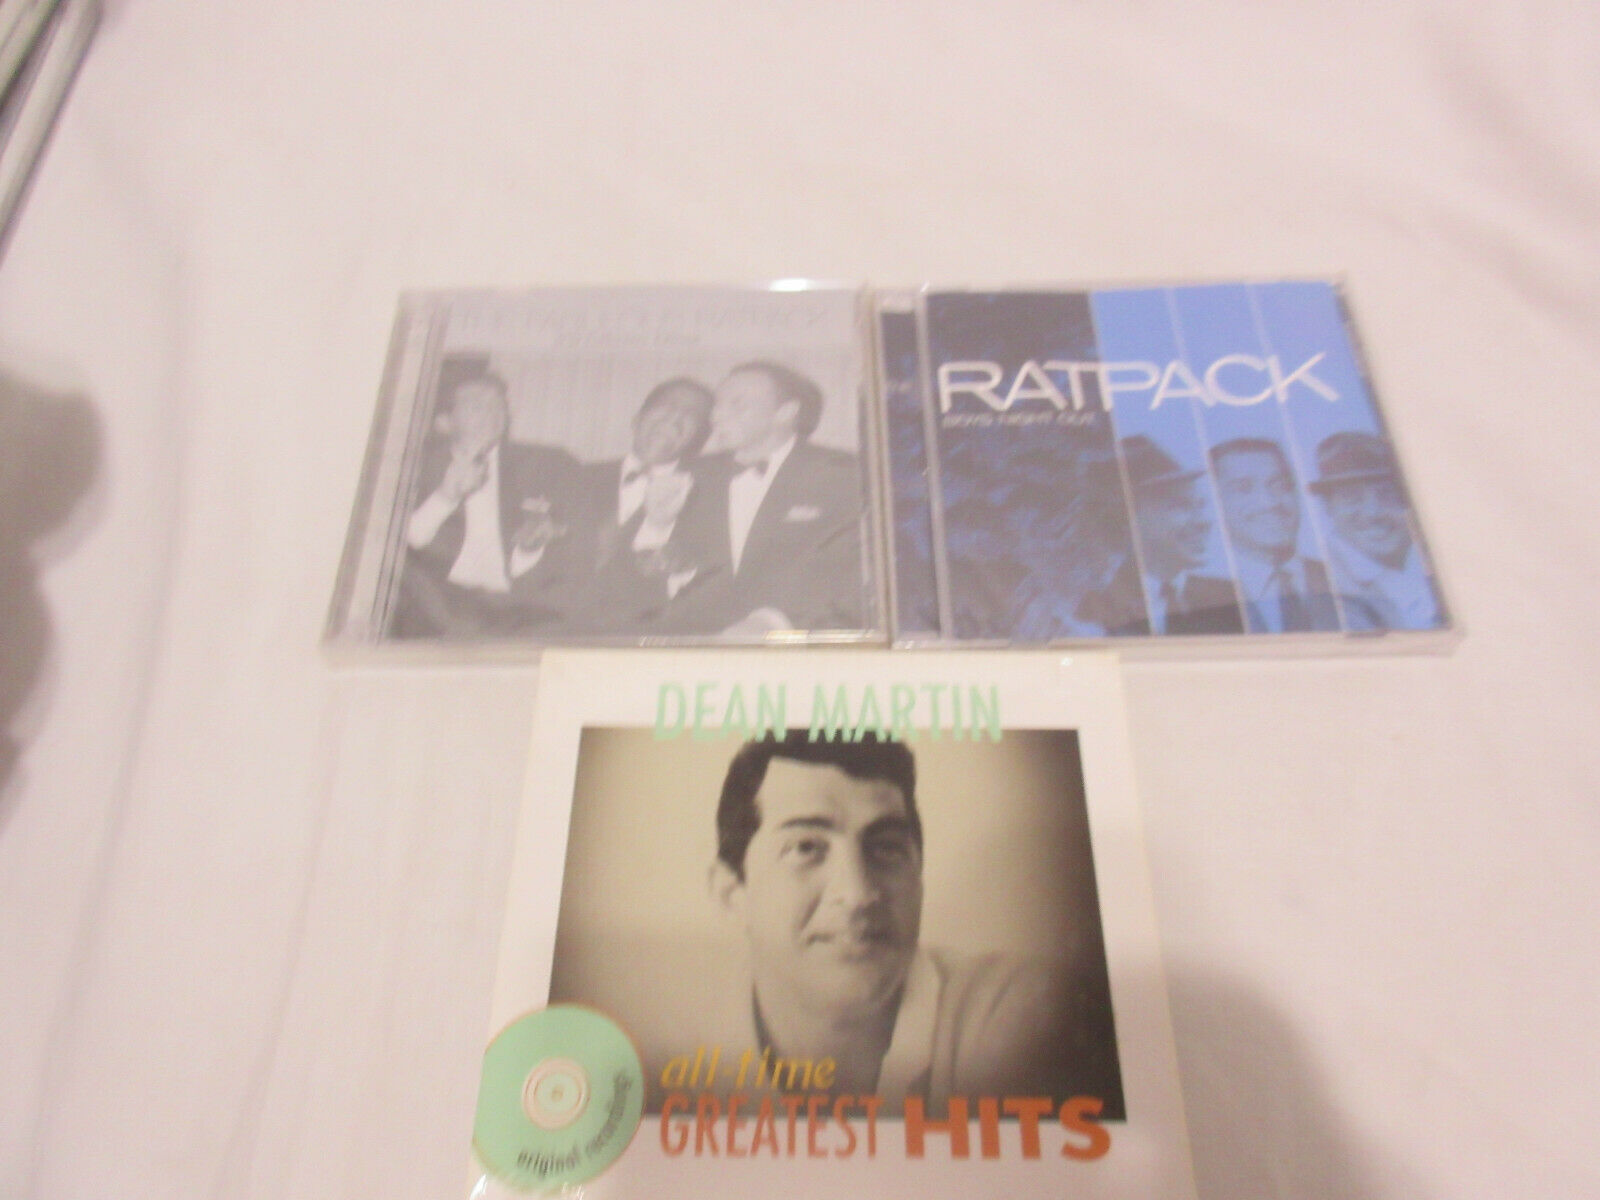 Primary image for 3 CD All New Sealed Rat Back & Dean Martin Greatest Hits Boys Night Out Fabulous